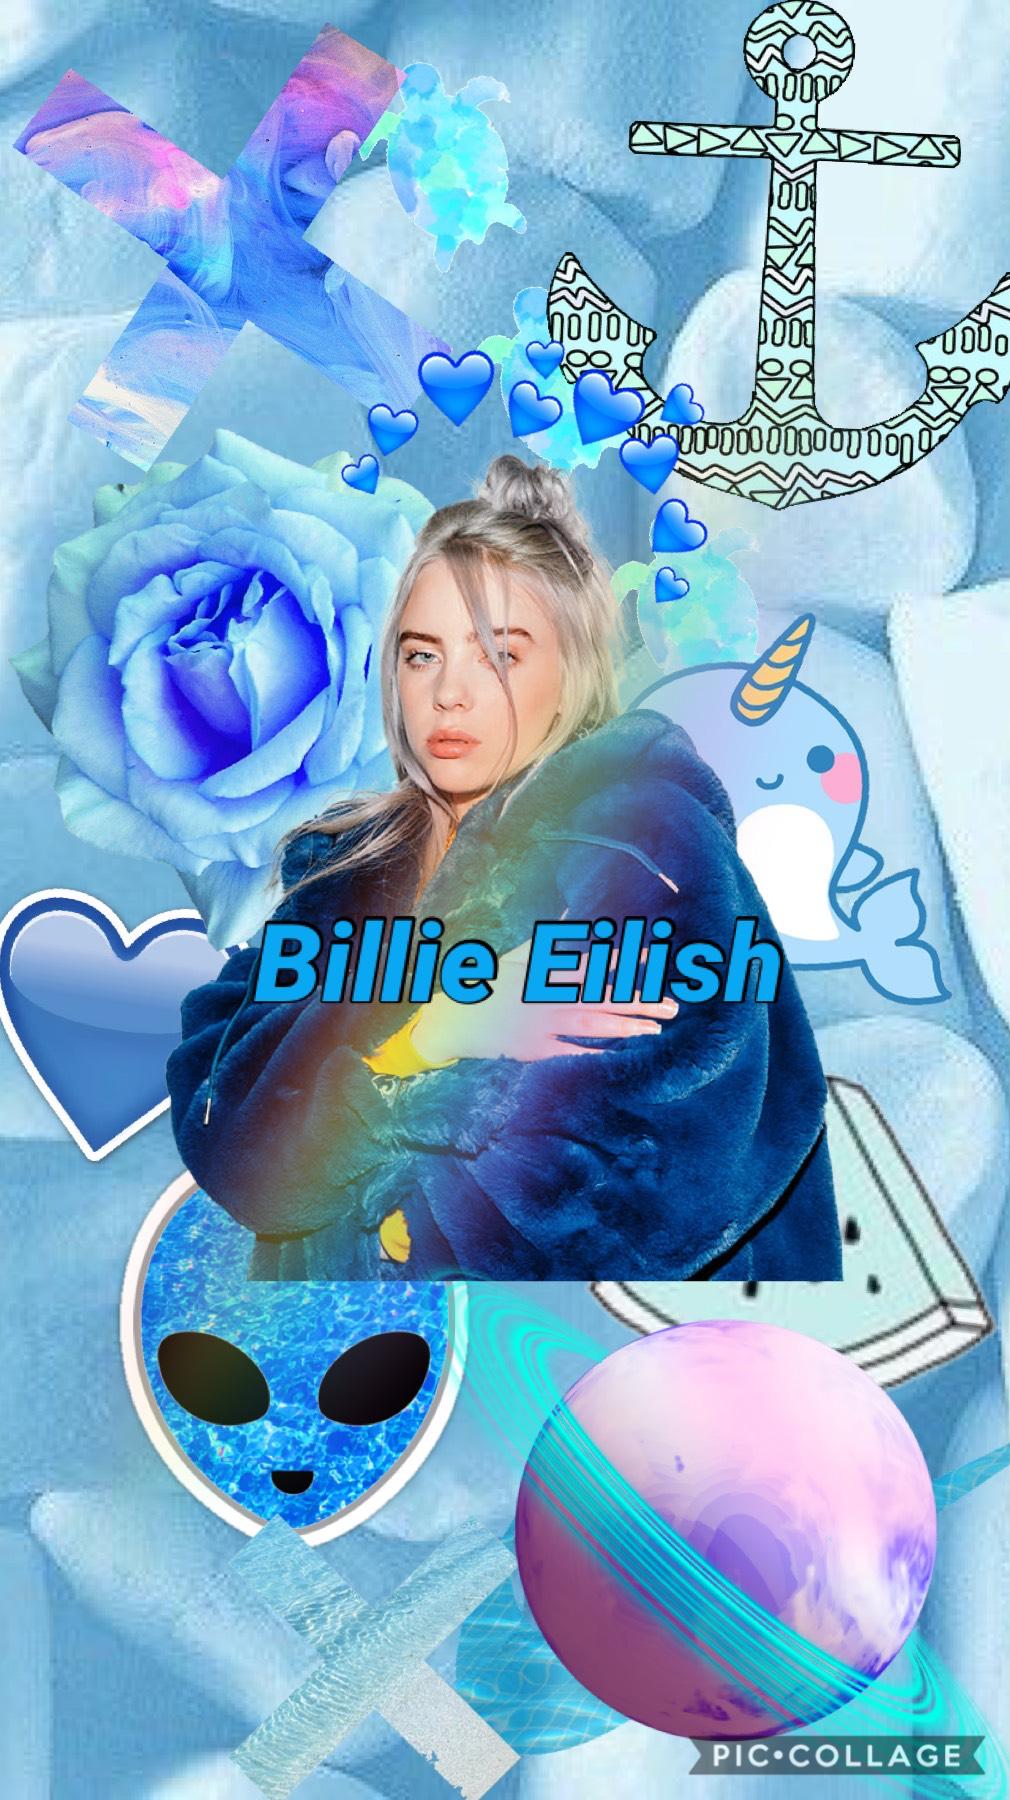 Billie Eilish collage 💙 I’m still sorta getting the hang of this app 😂 